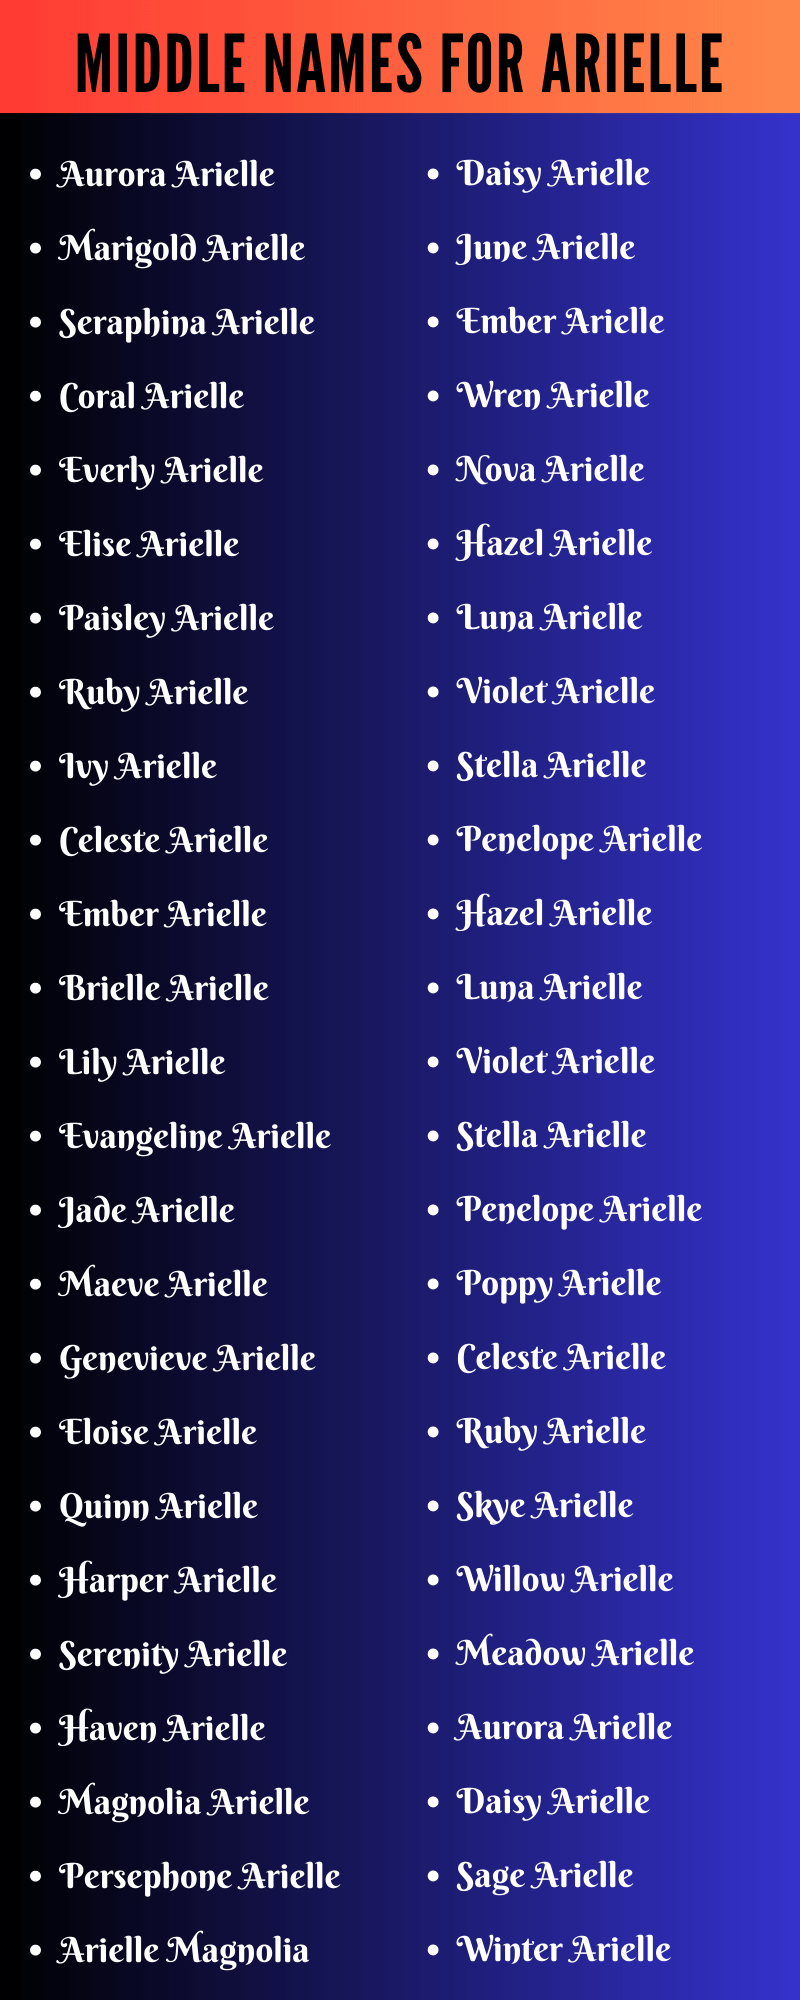 Middle Names For Arielle